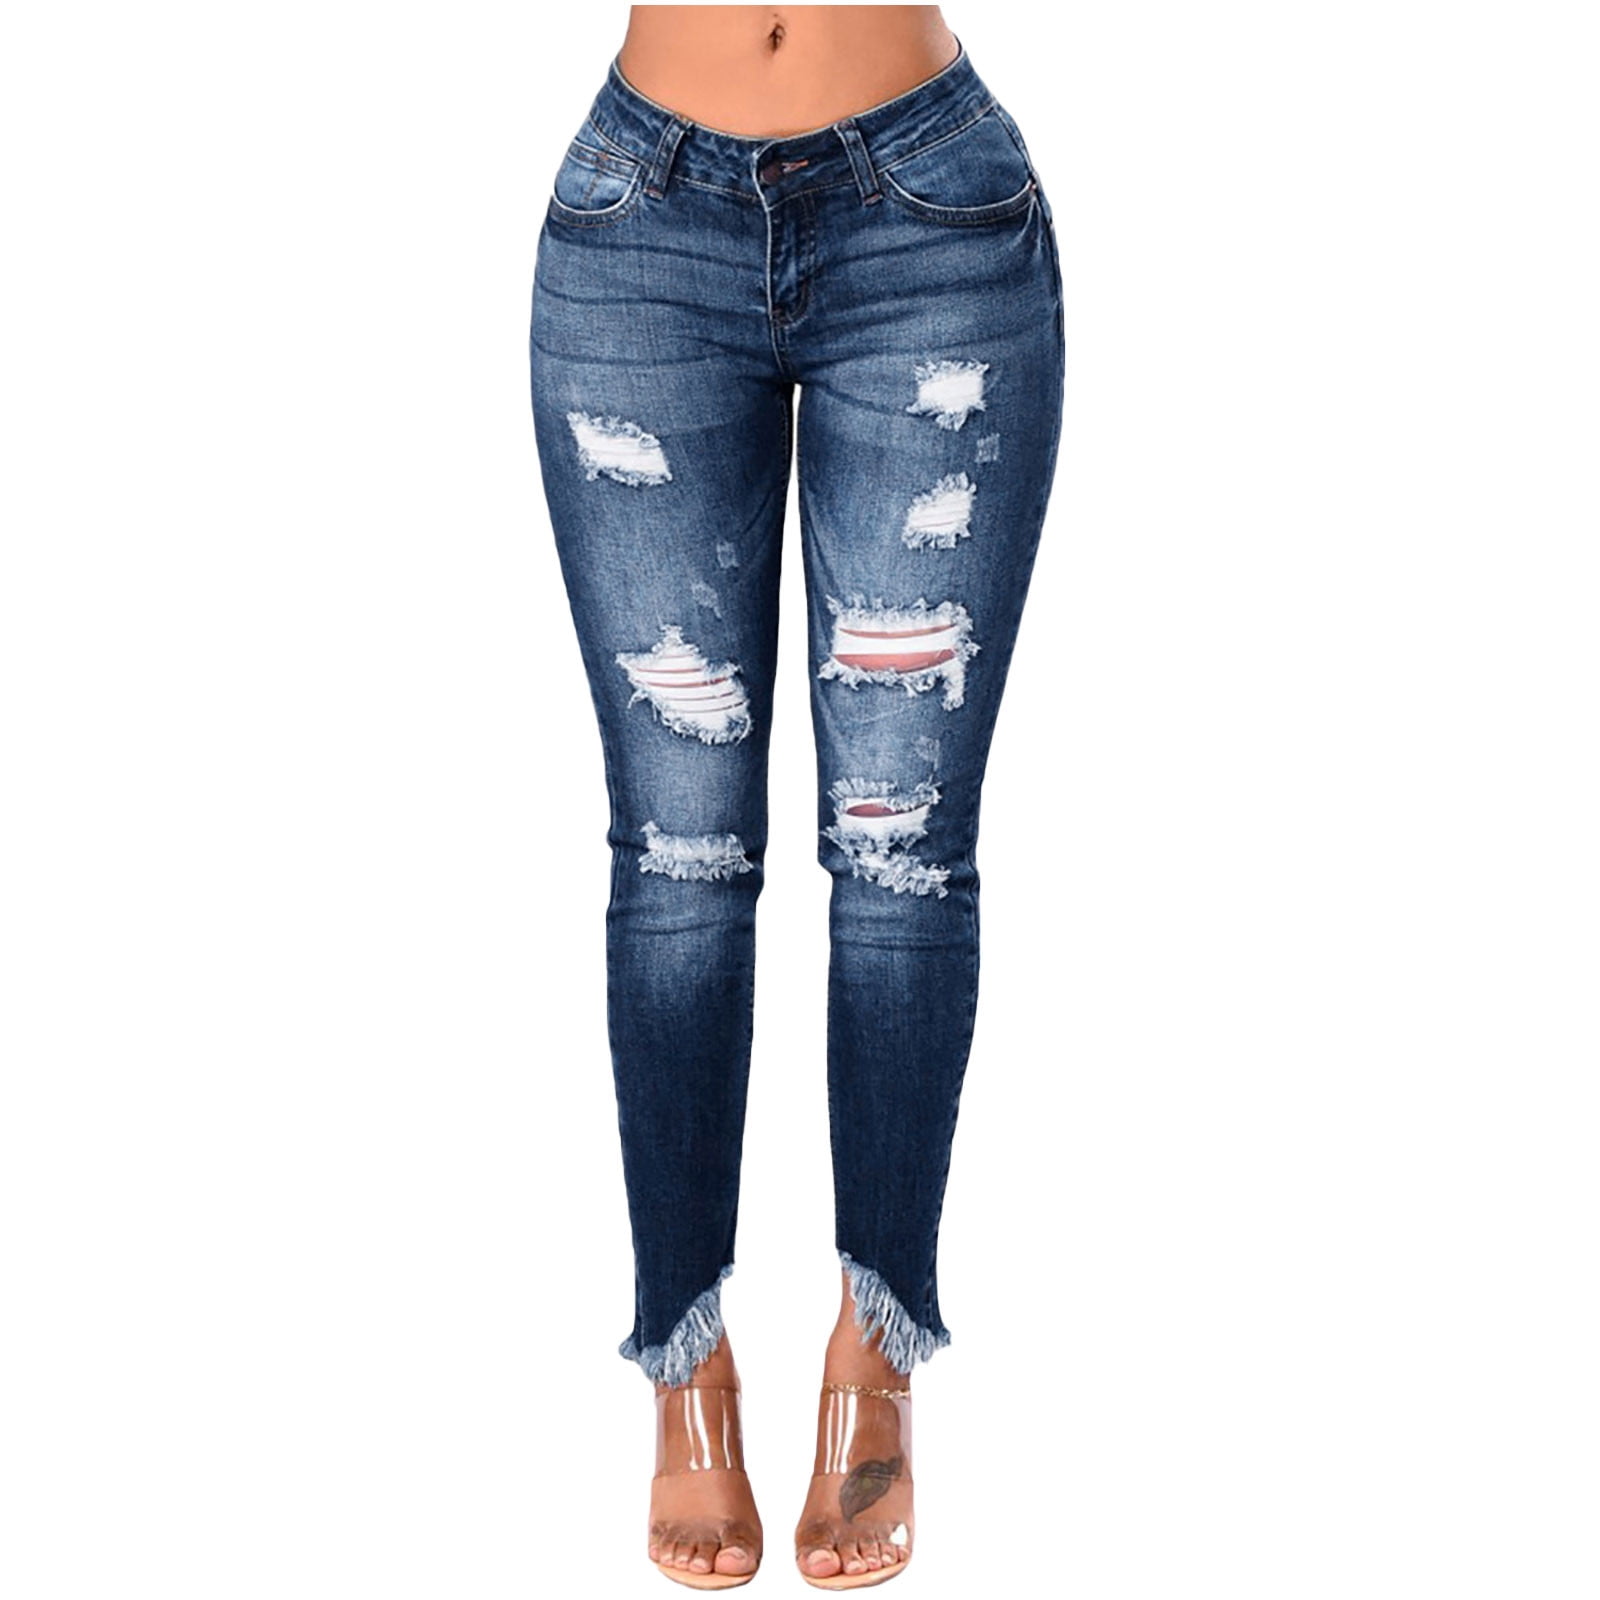 Leesechin Womens Jeans Clearance Tight Ripped Jeans Irregular Fringed ...